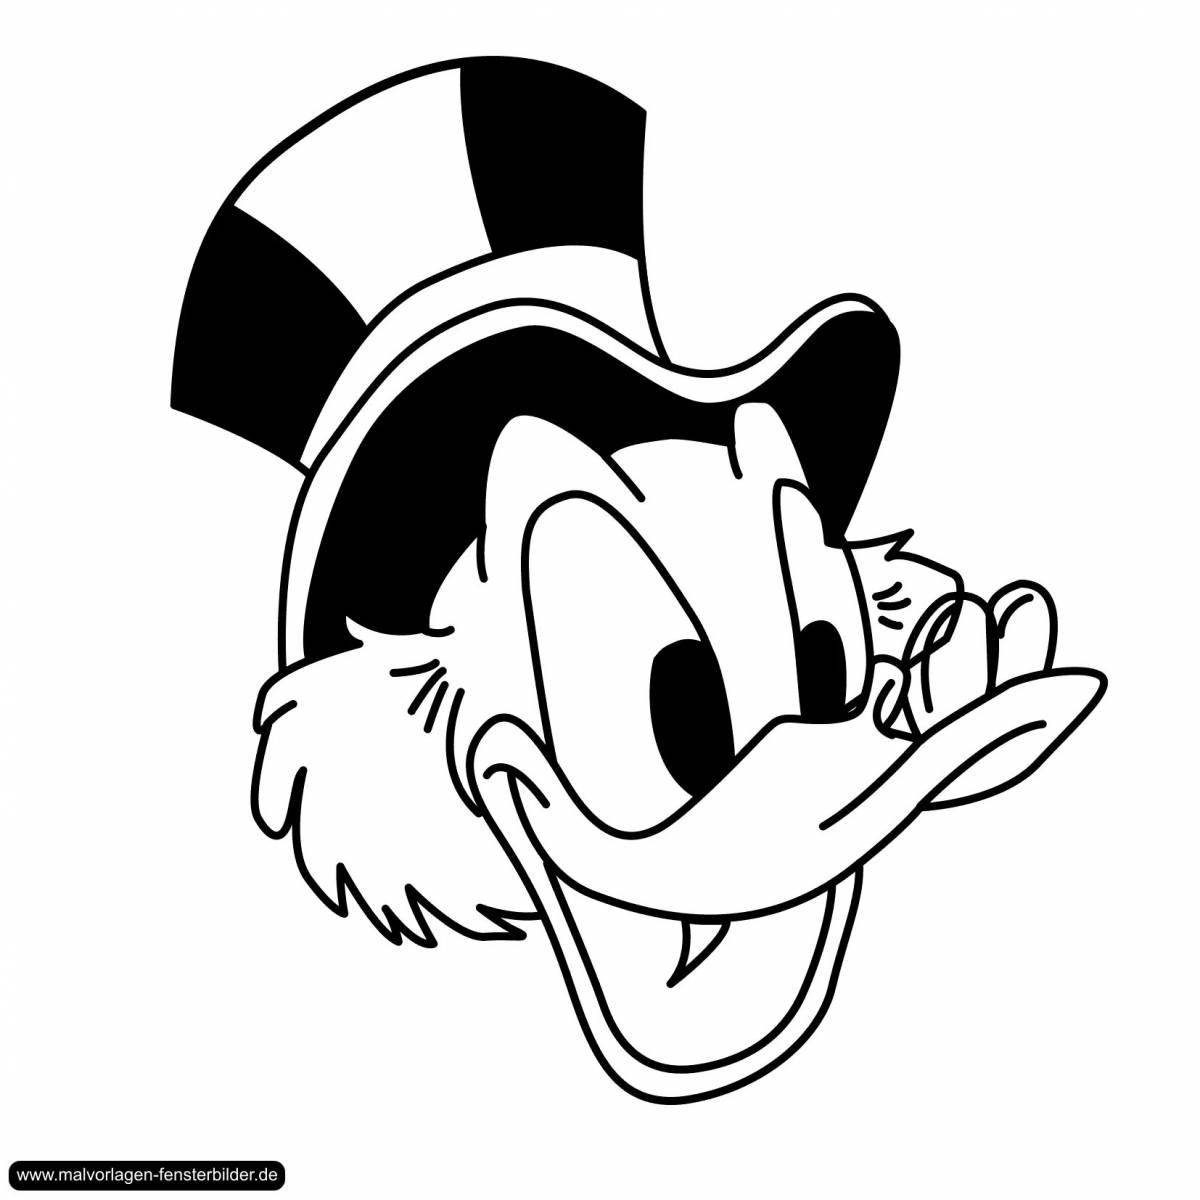 Colorful twist mcduck coloring page